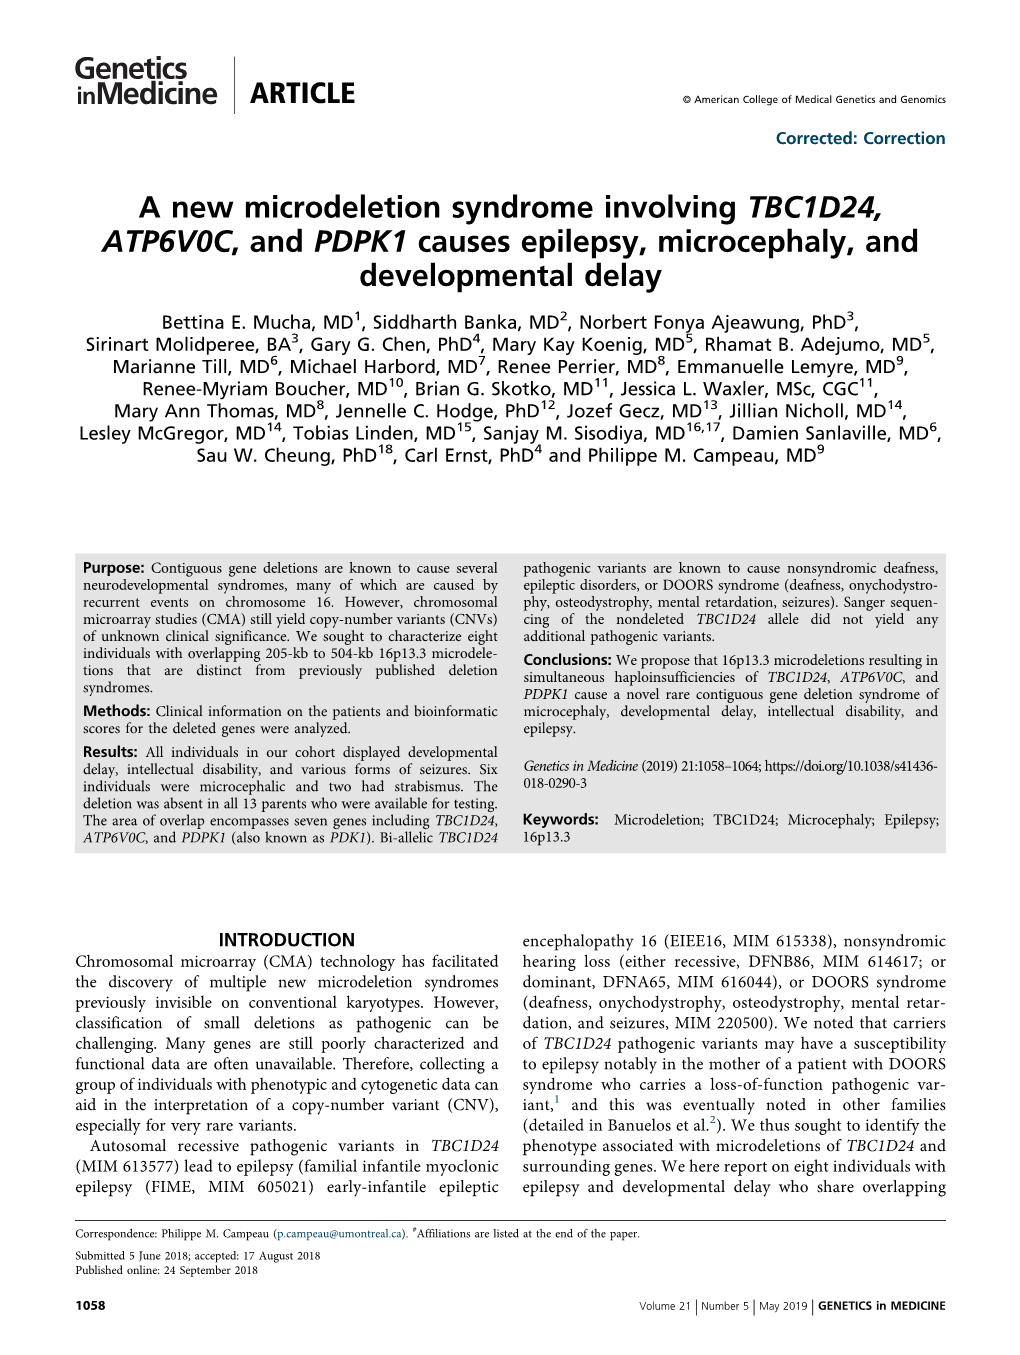 A New Microdeletion Syndrome Involving TBC1D24, ATP6V0C, and PDPK1 Causes Epilepsy, Microcephaly, and Developmental Delay